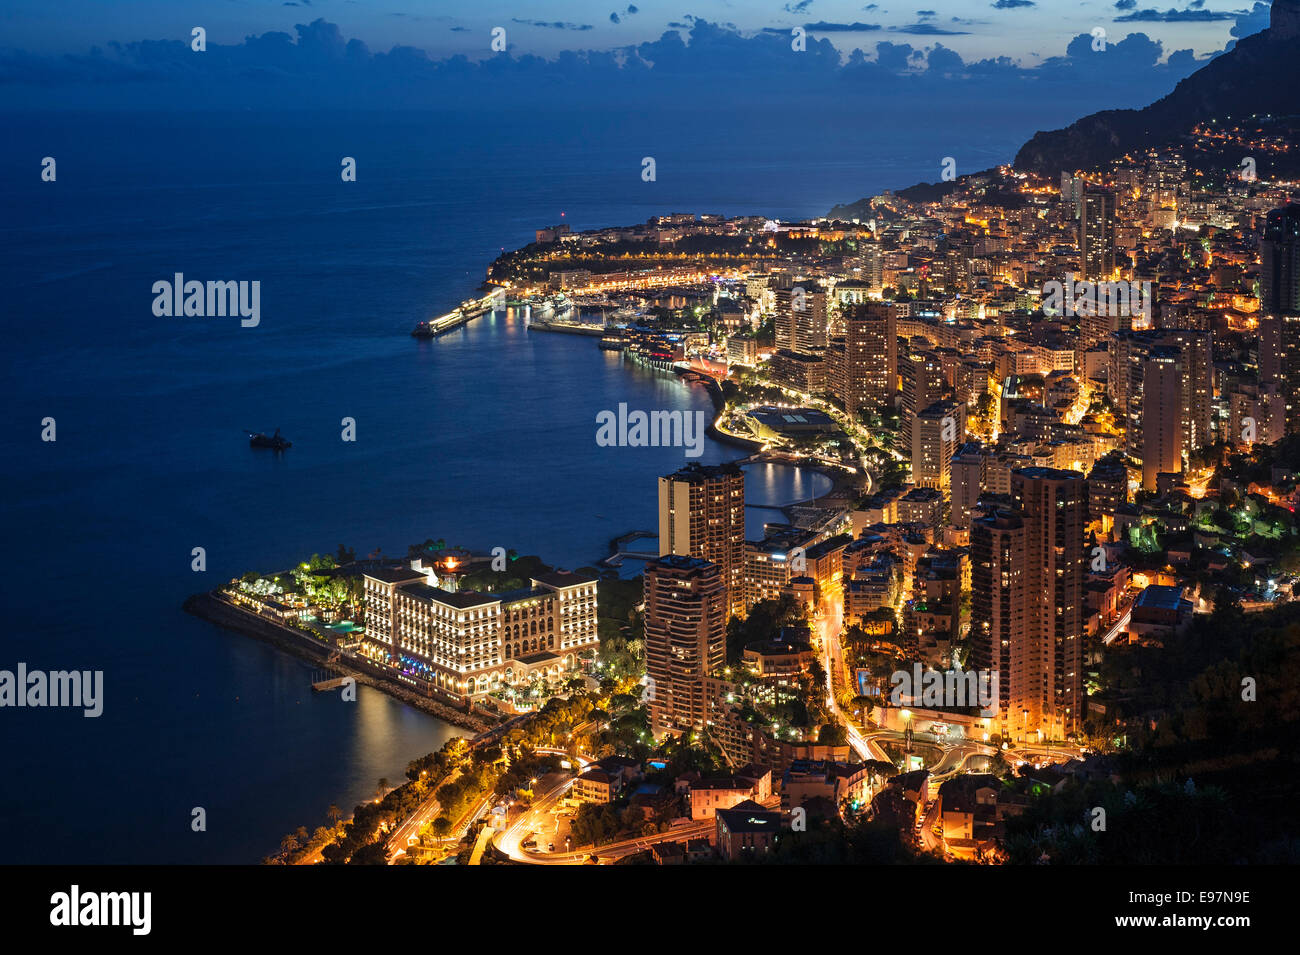 Aerial view over the city and port of Monte Carlo, Monaco along the French Riviera at night, Côte d'Azur Stock Photo